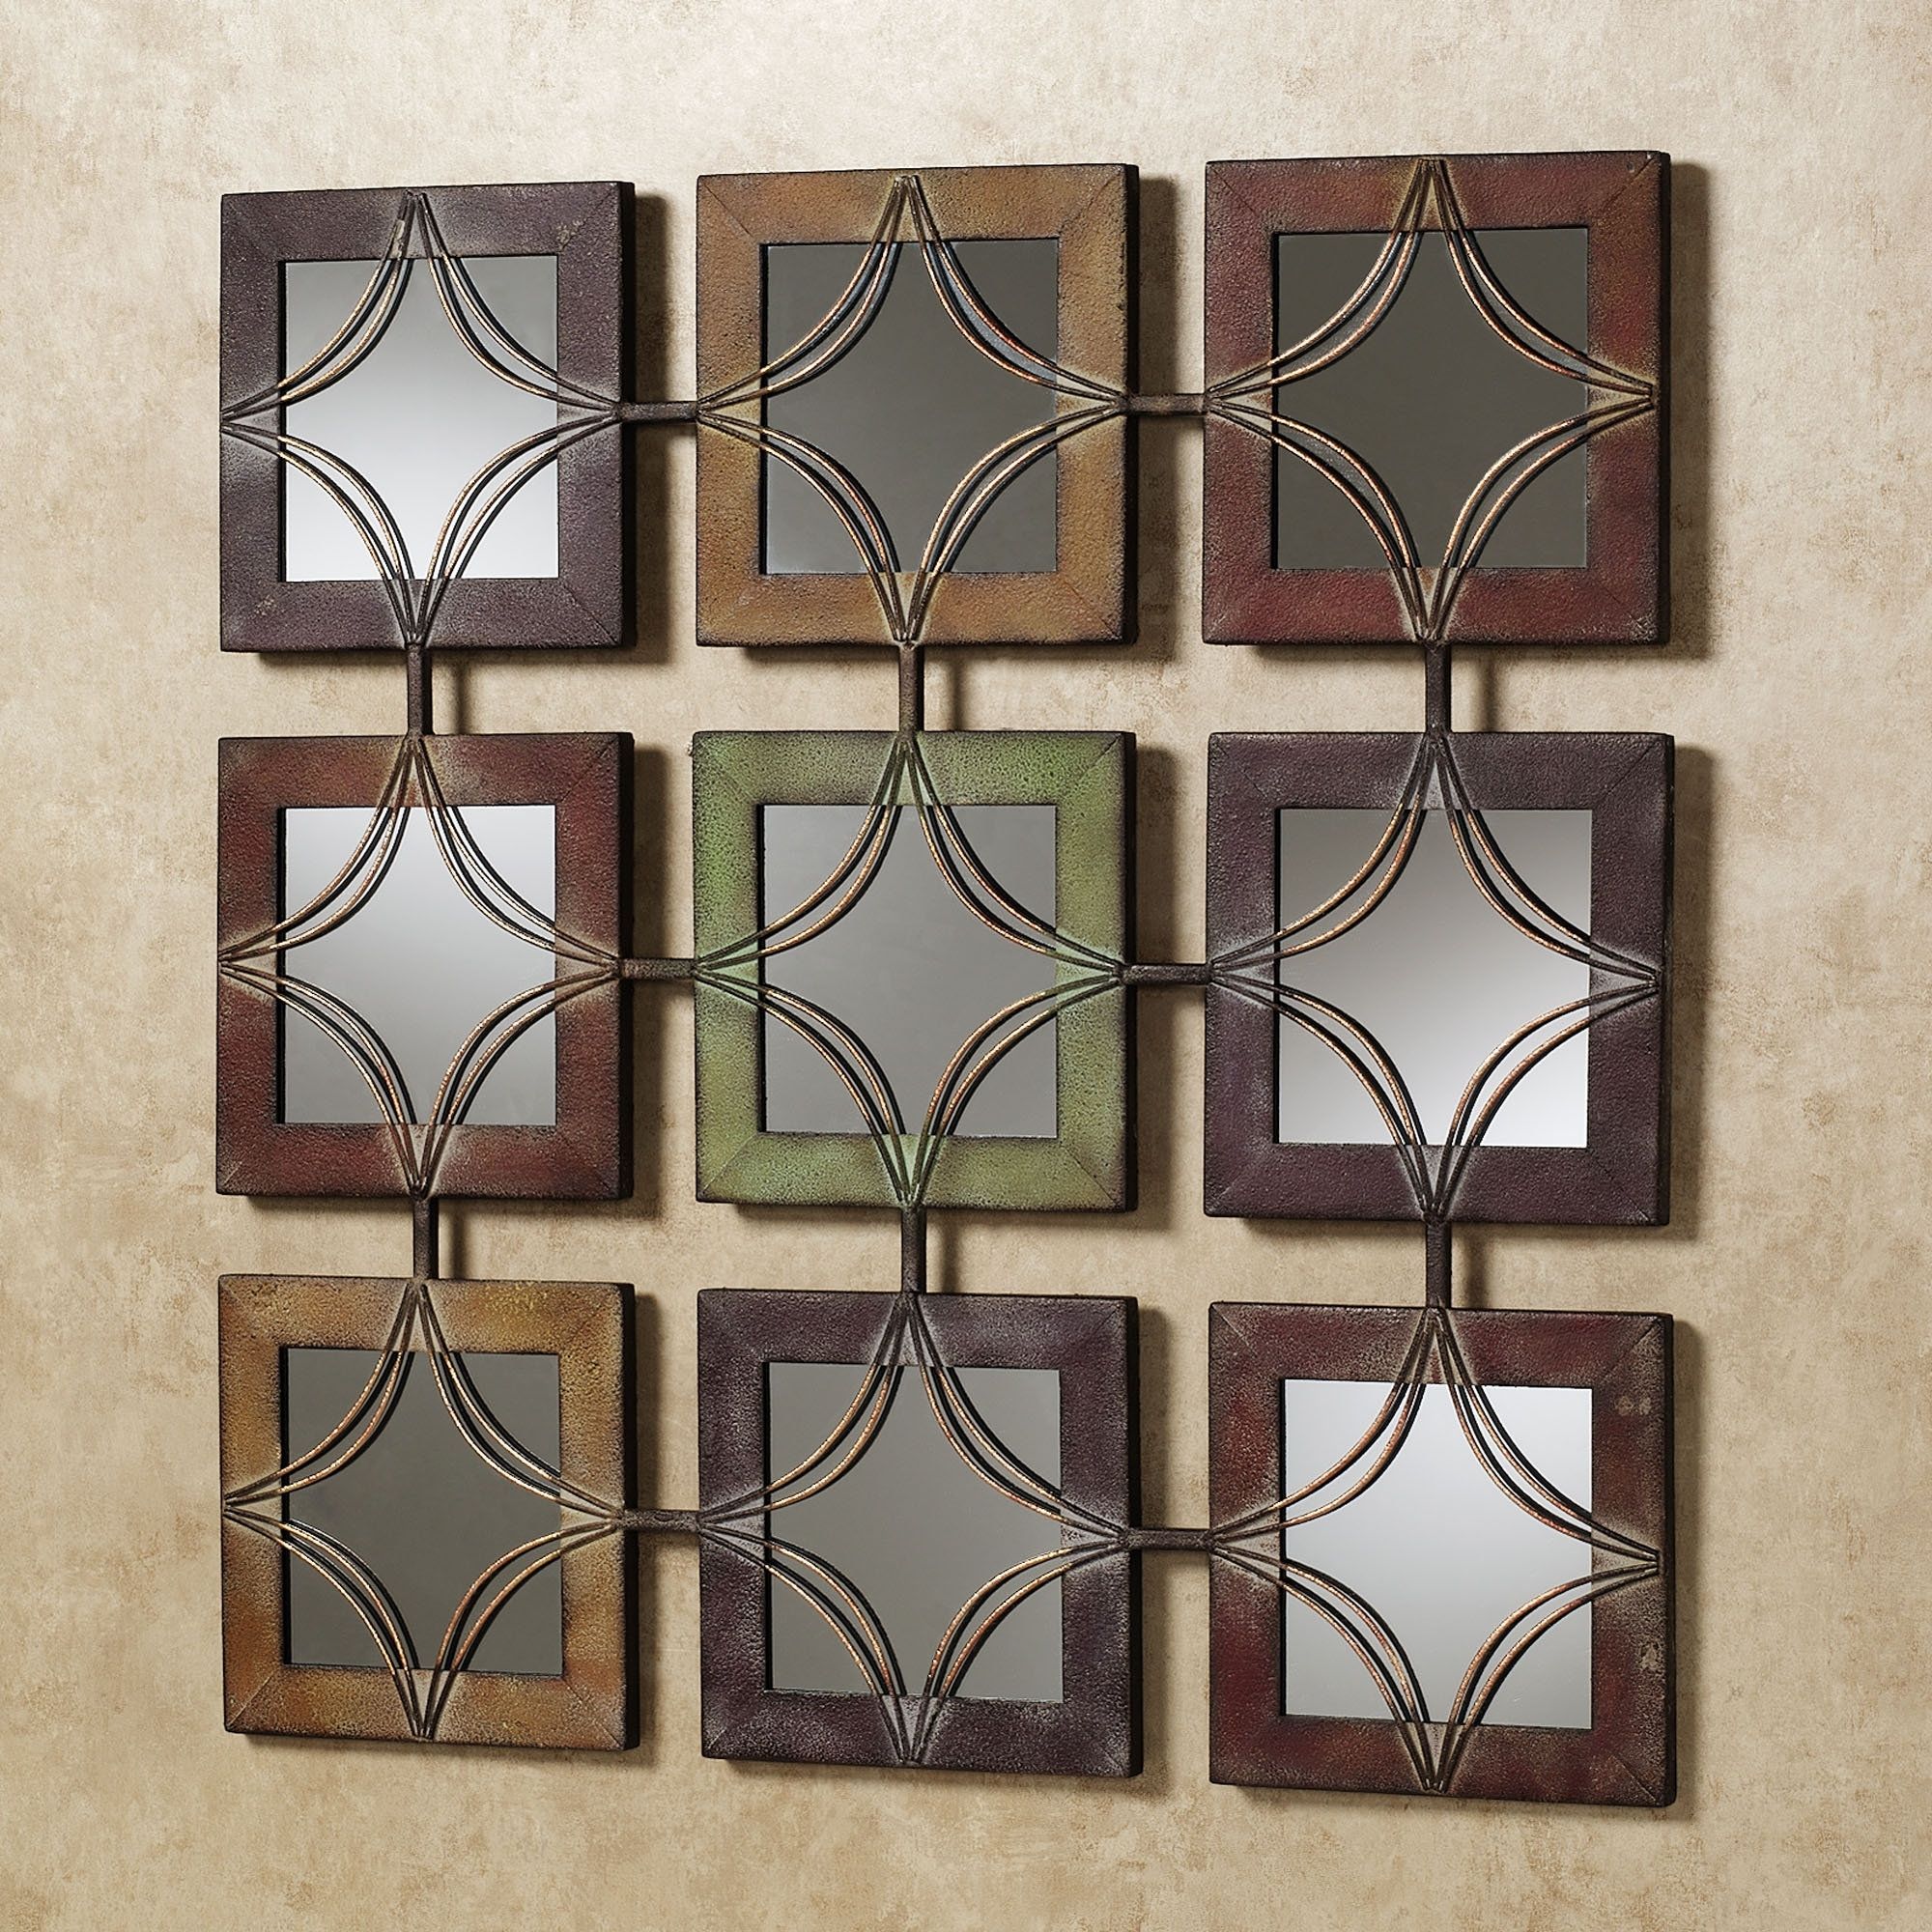 Most Recently Released Wall Art Decor: Domini Metal Mirrored Wall Art Textured Square Throughout Metal Framed Wall Art (View 3 of 15)